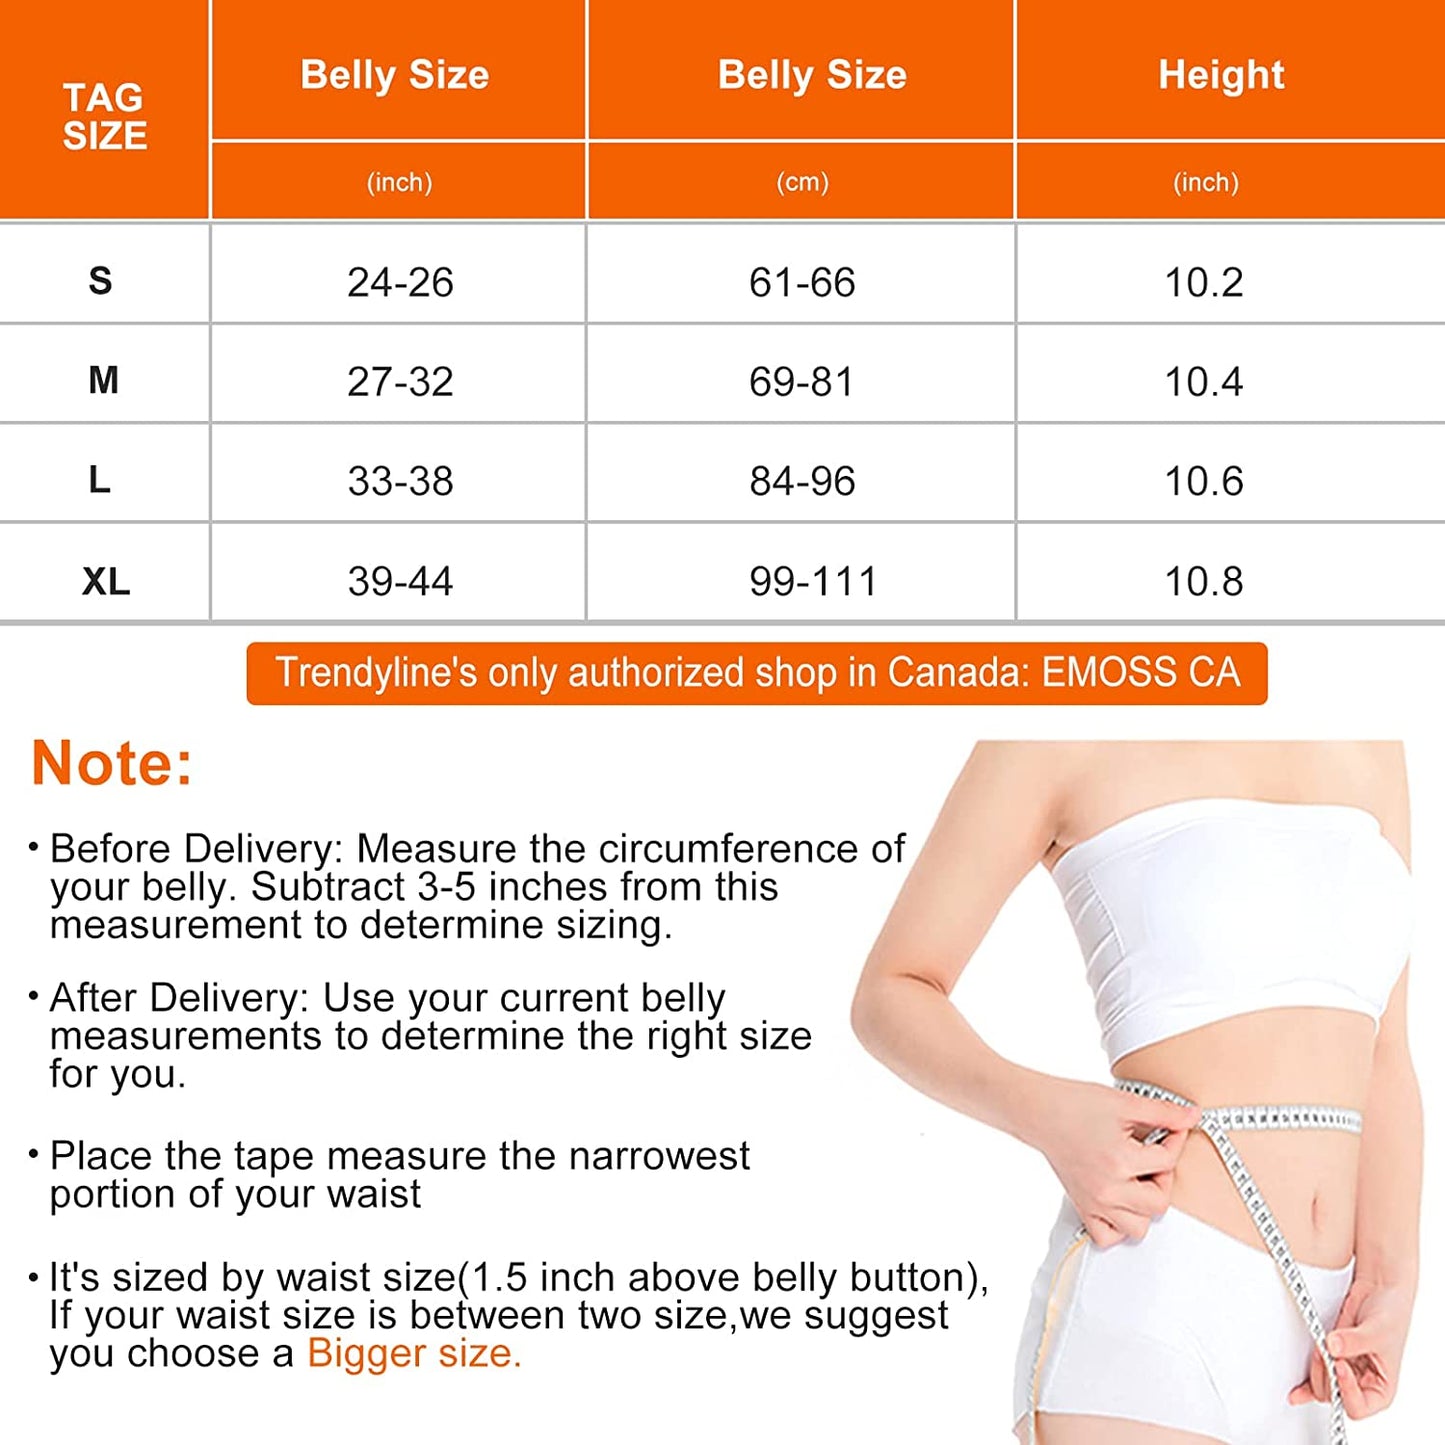 Hip Mall Women Postpartum Girdle Corset Recovery Belly Band Wrap Belt Nude Small